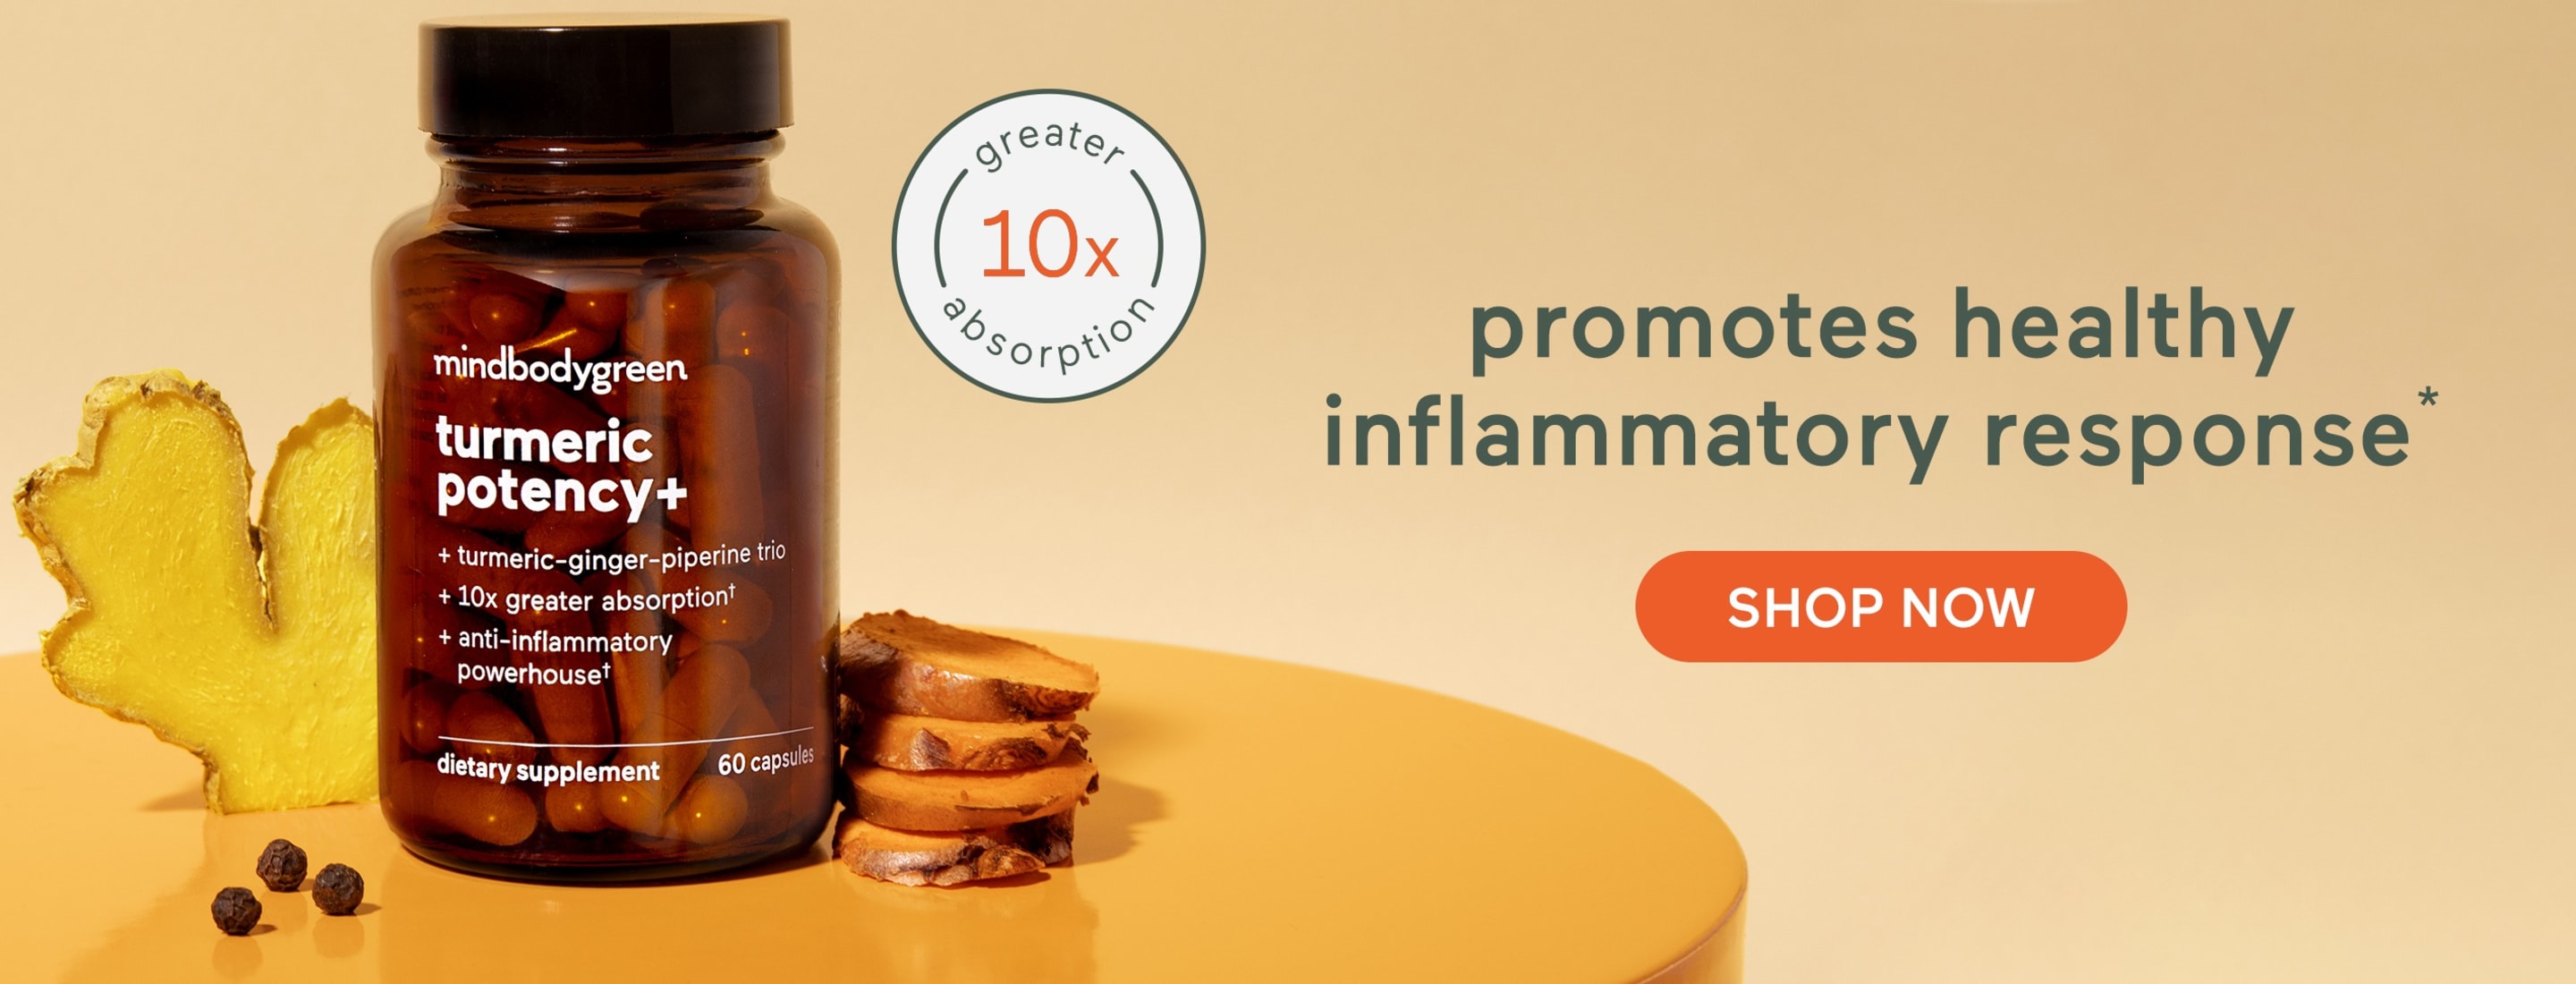 Promotes healthy inflammatory response* SHOP NOW